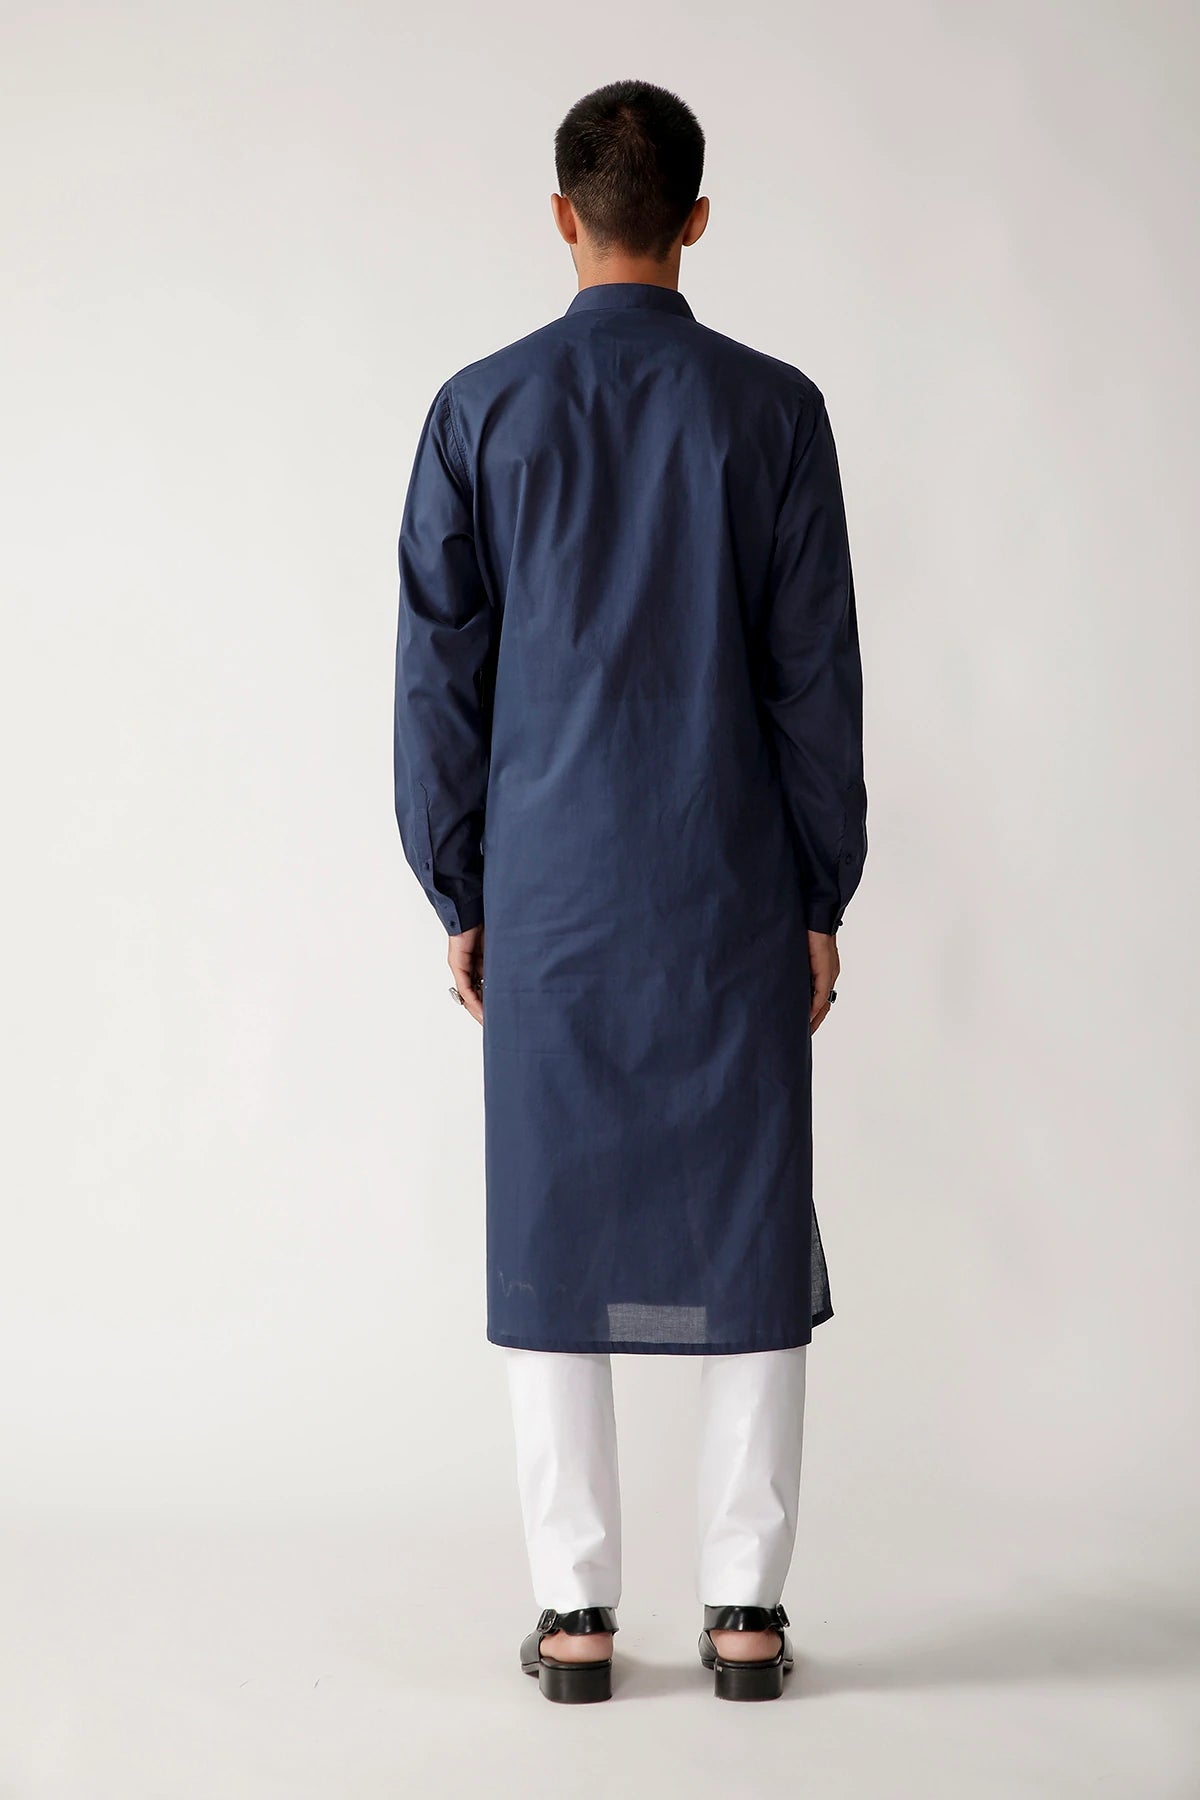 Navy Pintucked Kurta Set Indian Clothing in Denver, CO, Aurora, CO, Boulder, CO, Fort Collins, CO, Colorado Springs, CO, Parker, CO, Highlands Ranch, CO, Cherry Creek, CO, Centennial, CO, and Longmont, CO. NATIONWIDE SHIPPING USA- India Fashion X